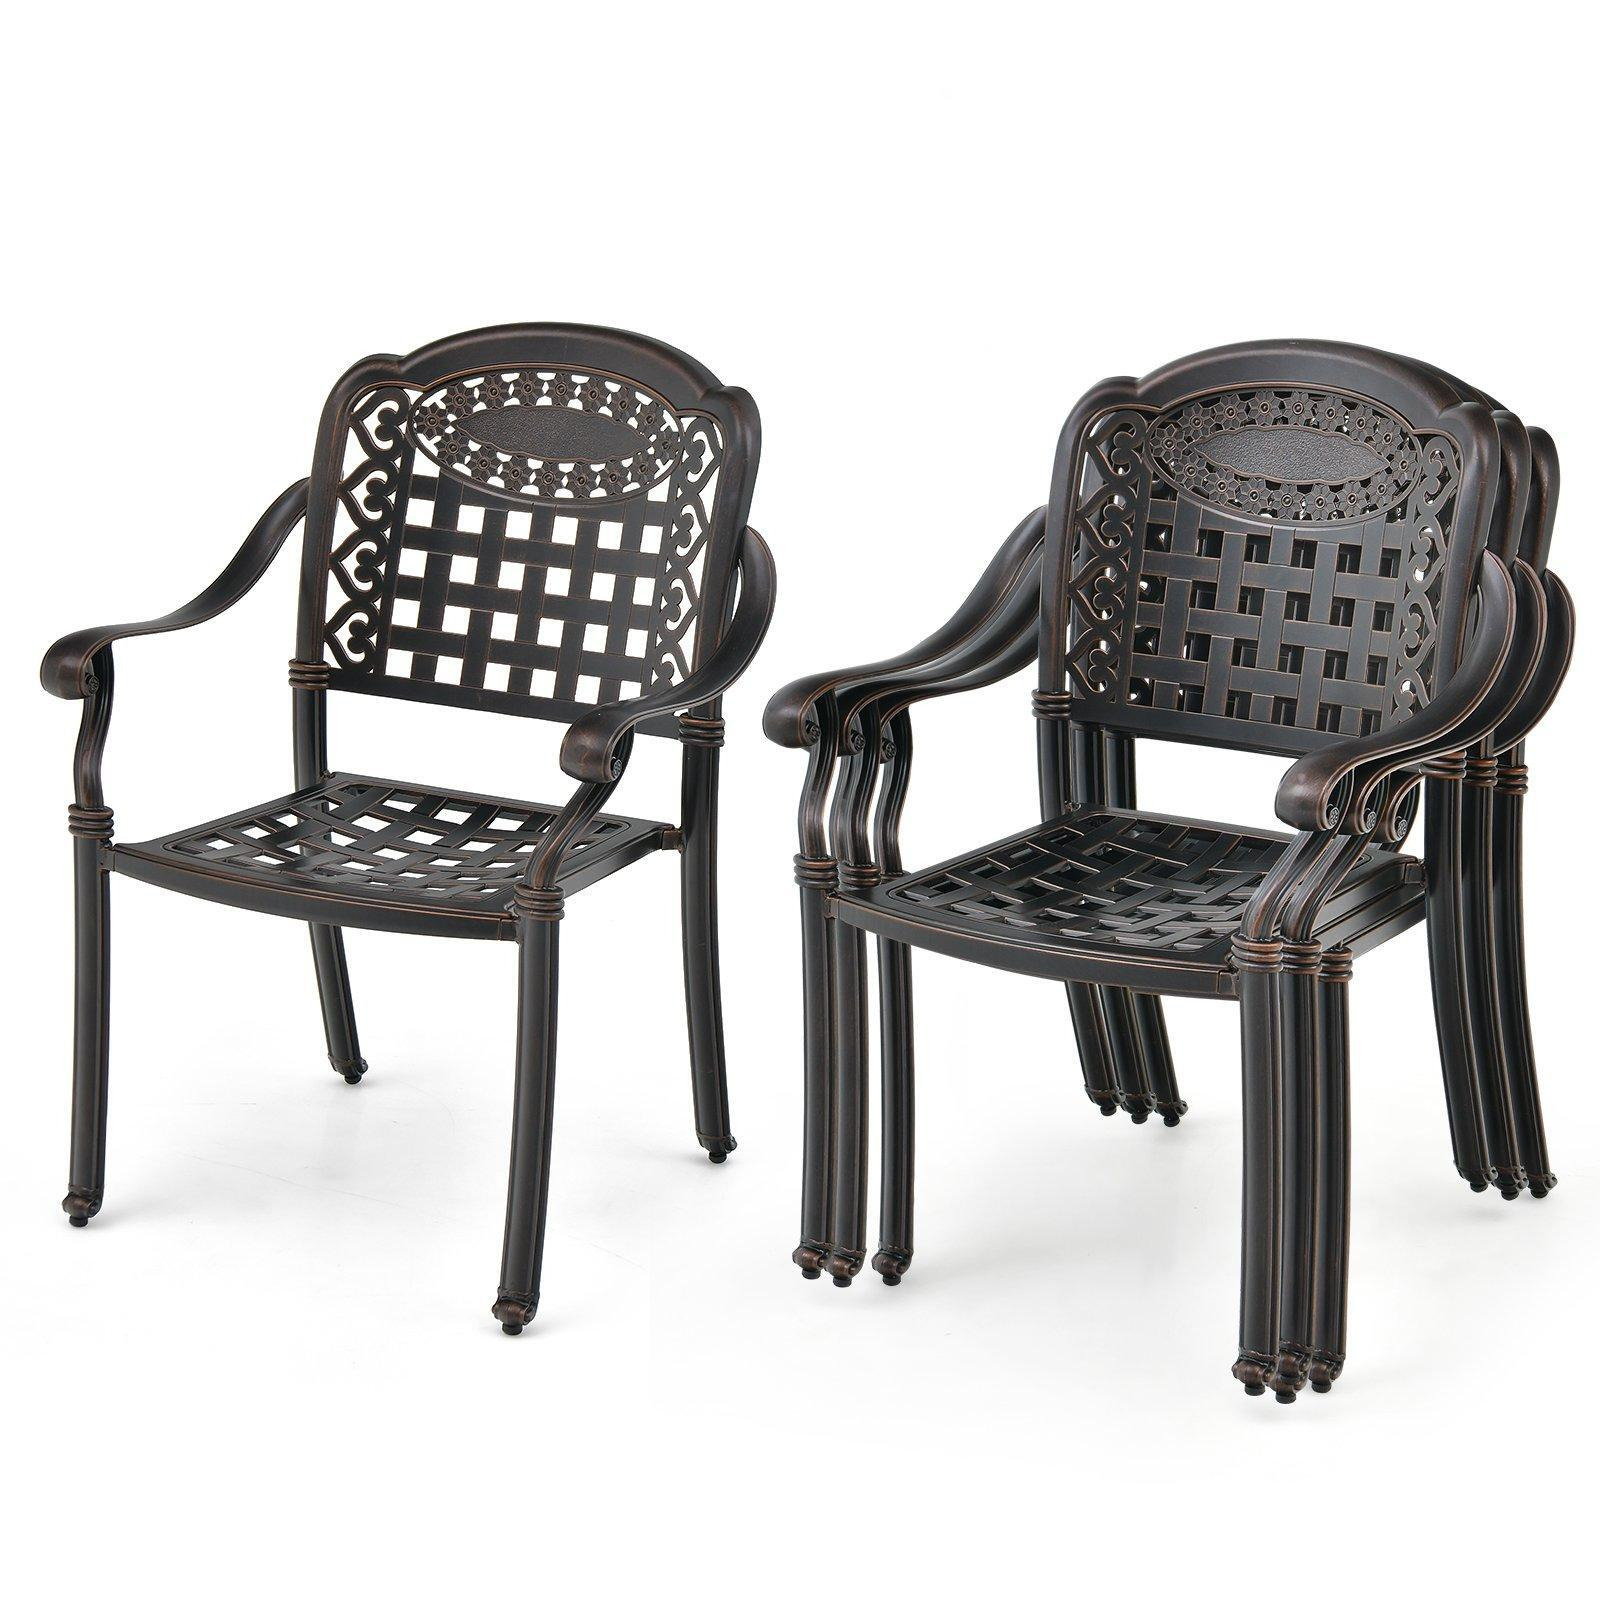 Set of 2 Cast Aluminum Patio Chairs Stackable Outdoor Dining Chairs with Armrest - image 1